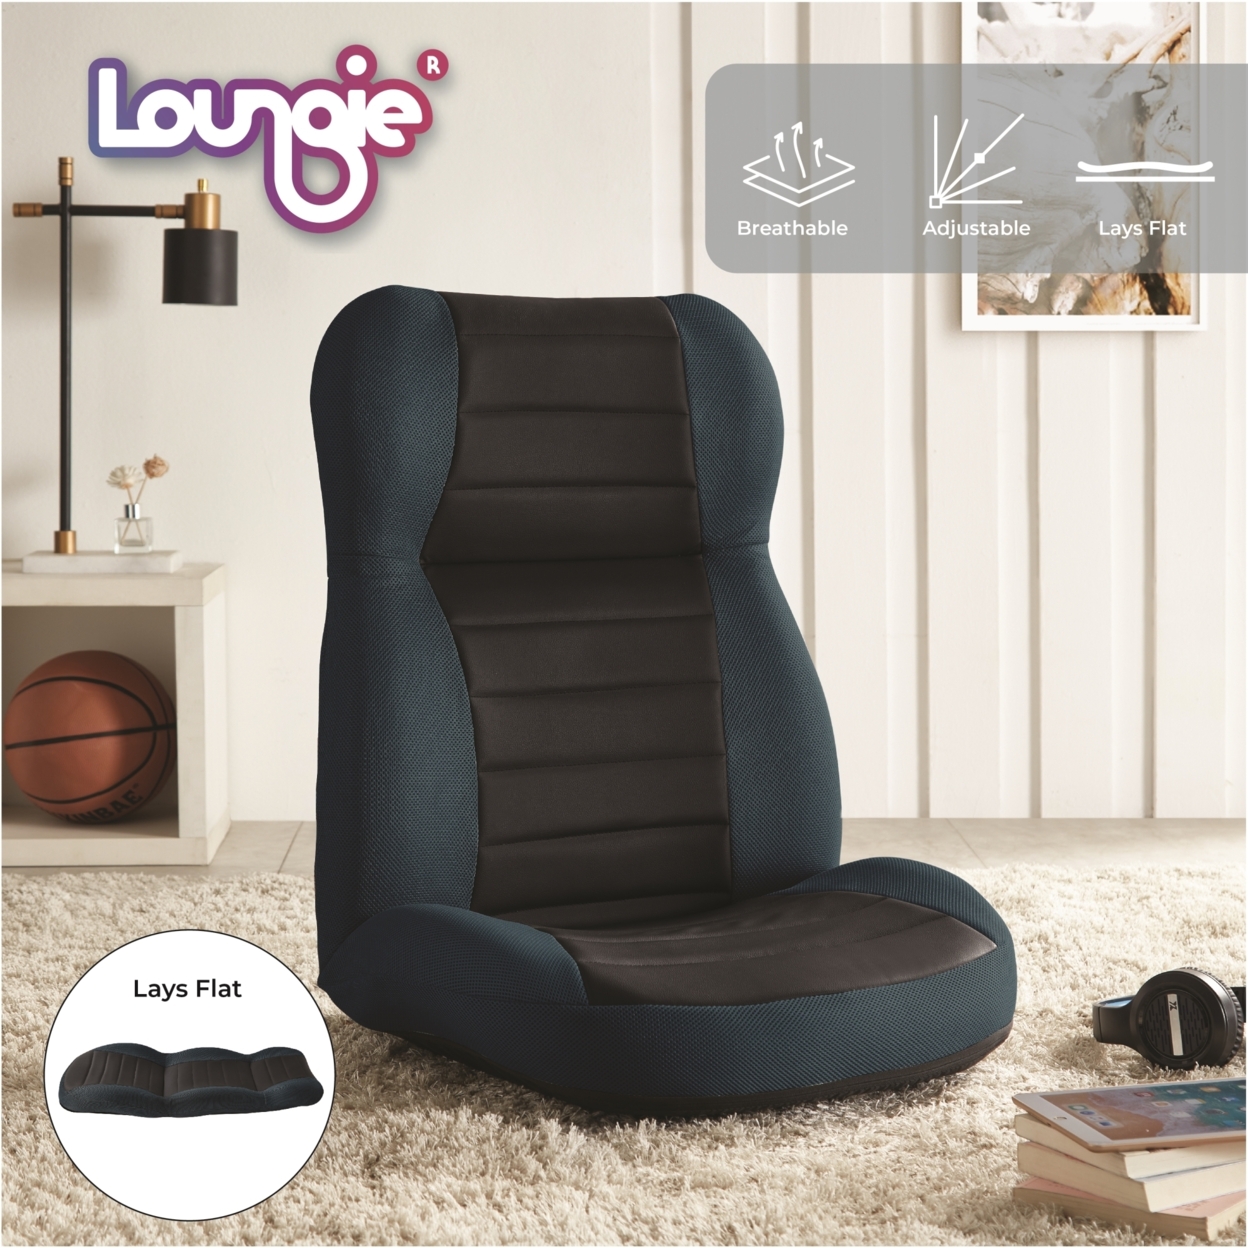 Snow Chair - 5 Adjustable Back Positions, 3 Headrest Positions, Reclines To Flat, Washable Cover, Steel Rod Construction - Black